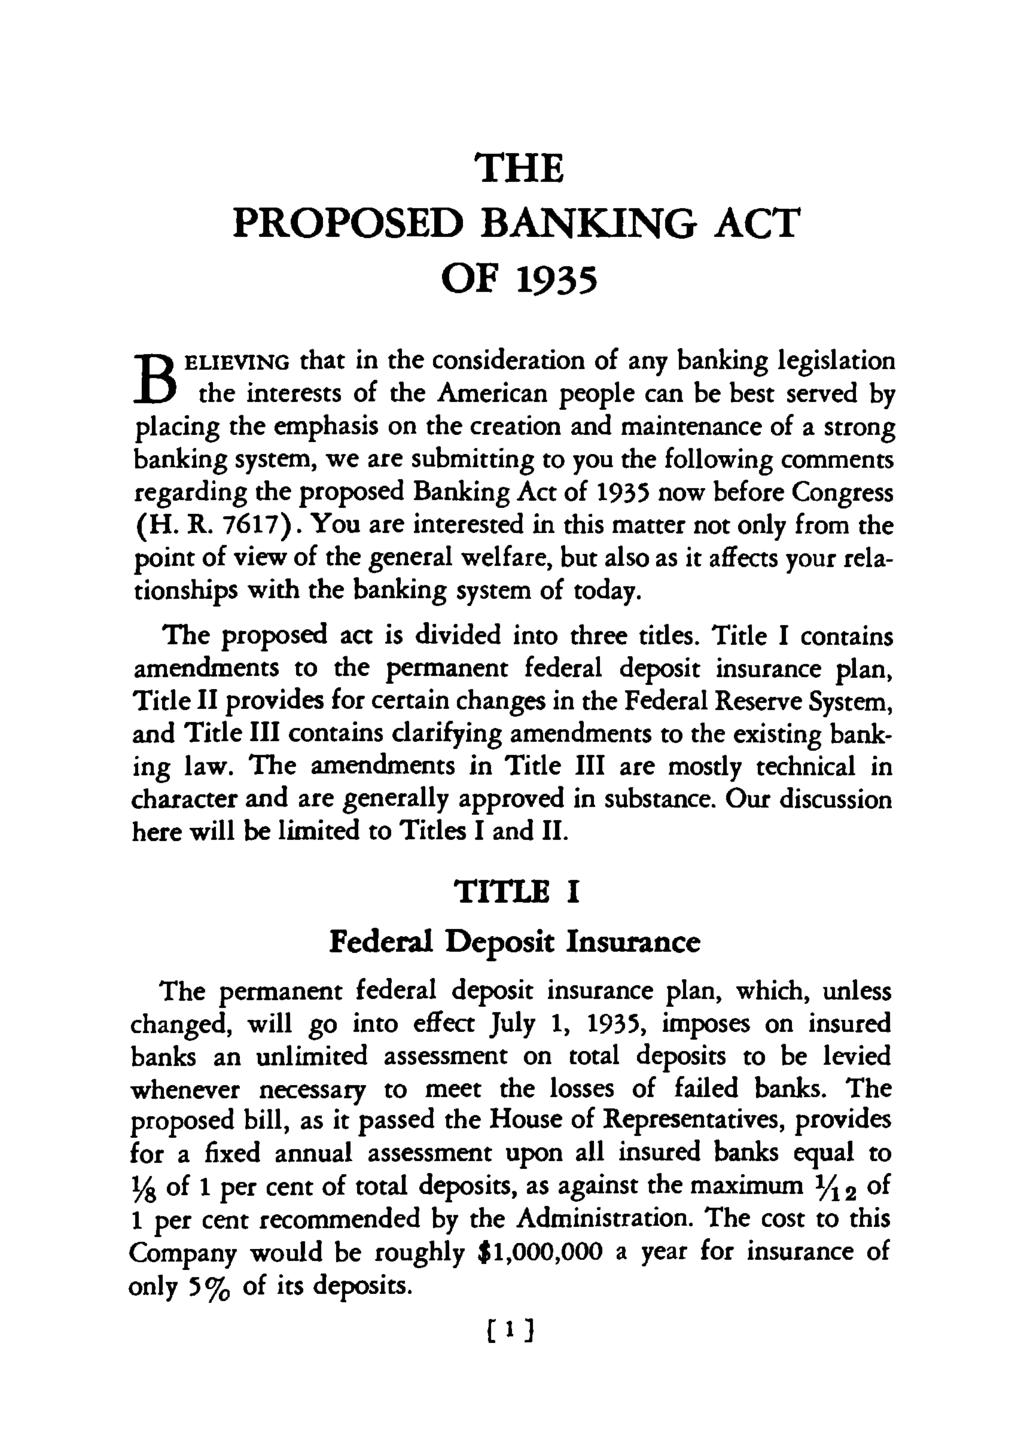 THE PROPOSED BANKING ACT OF 1935 BELIEVING that in the consideration of any banking legislation the interests of the American people can be best served by placing the emphasis on the creation and